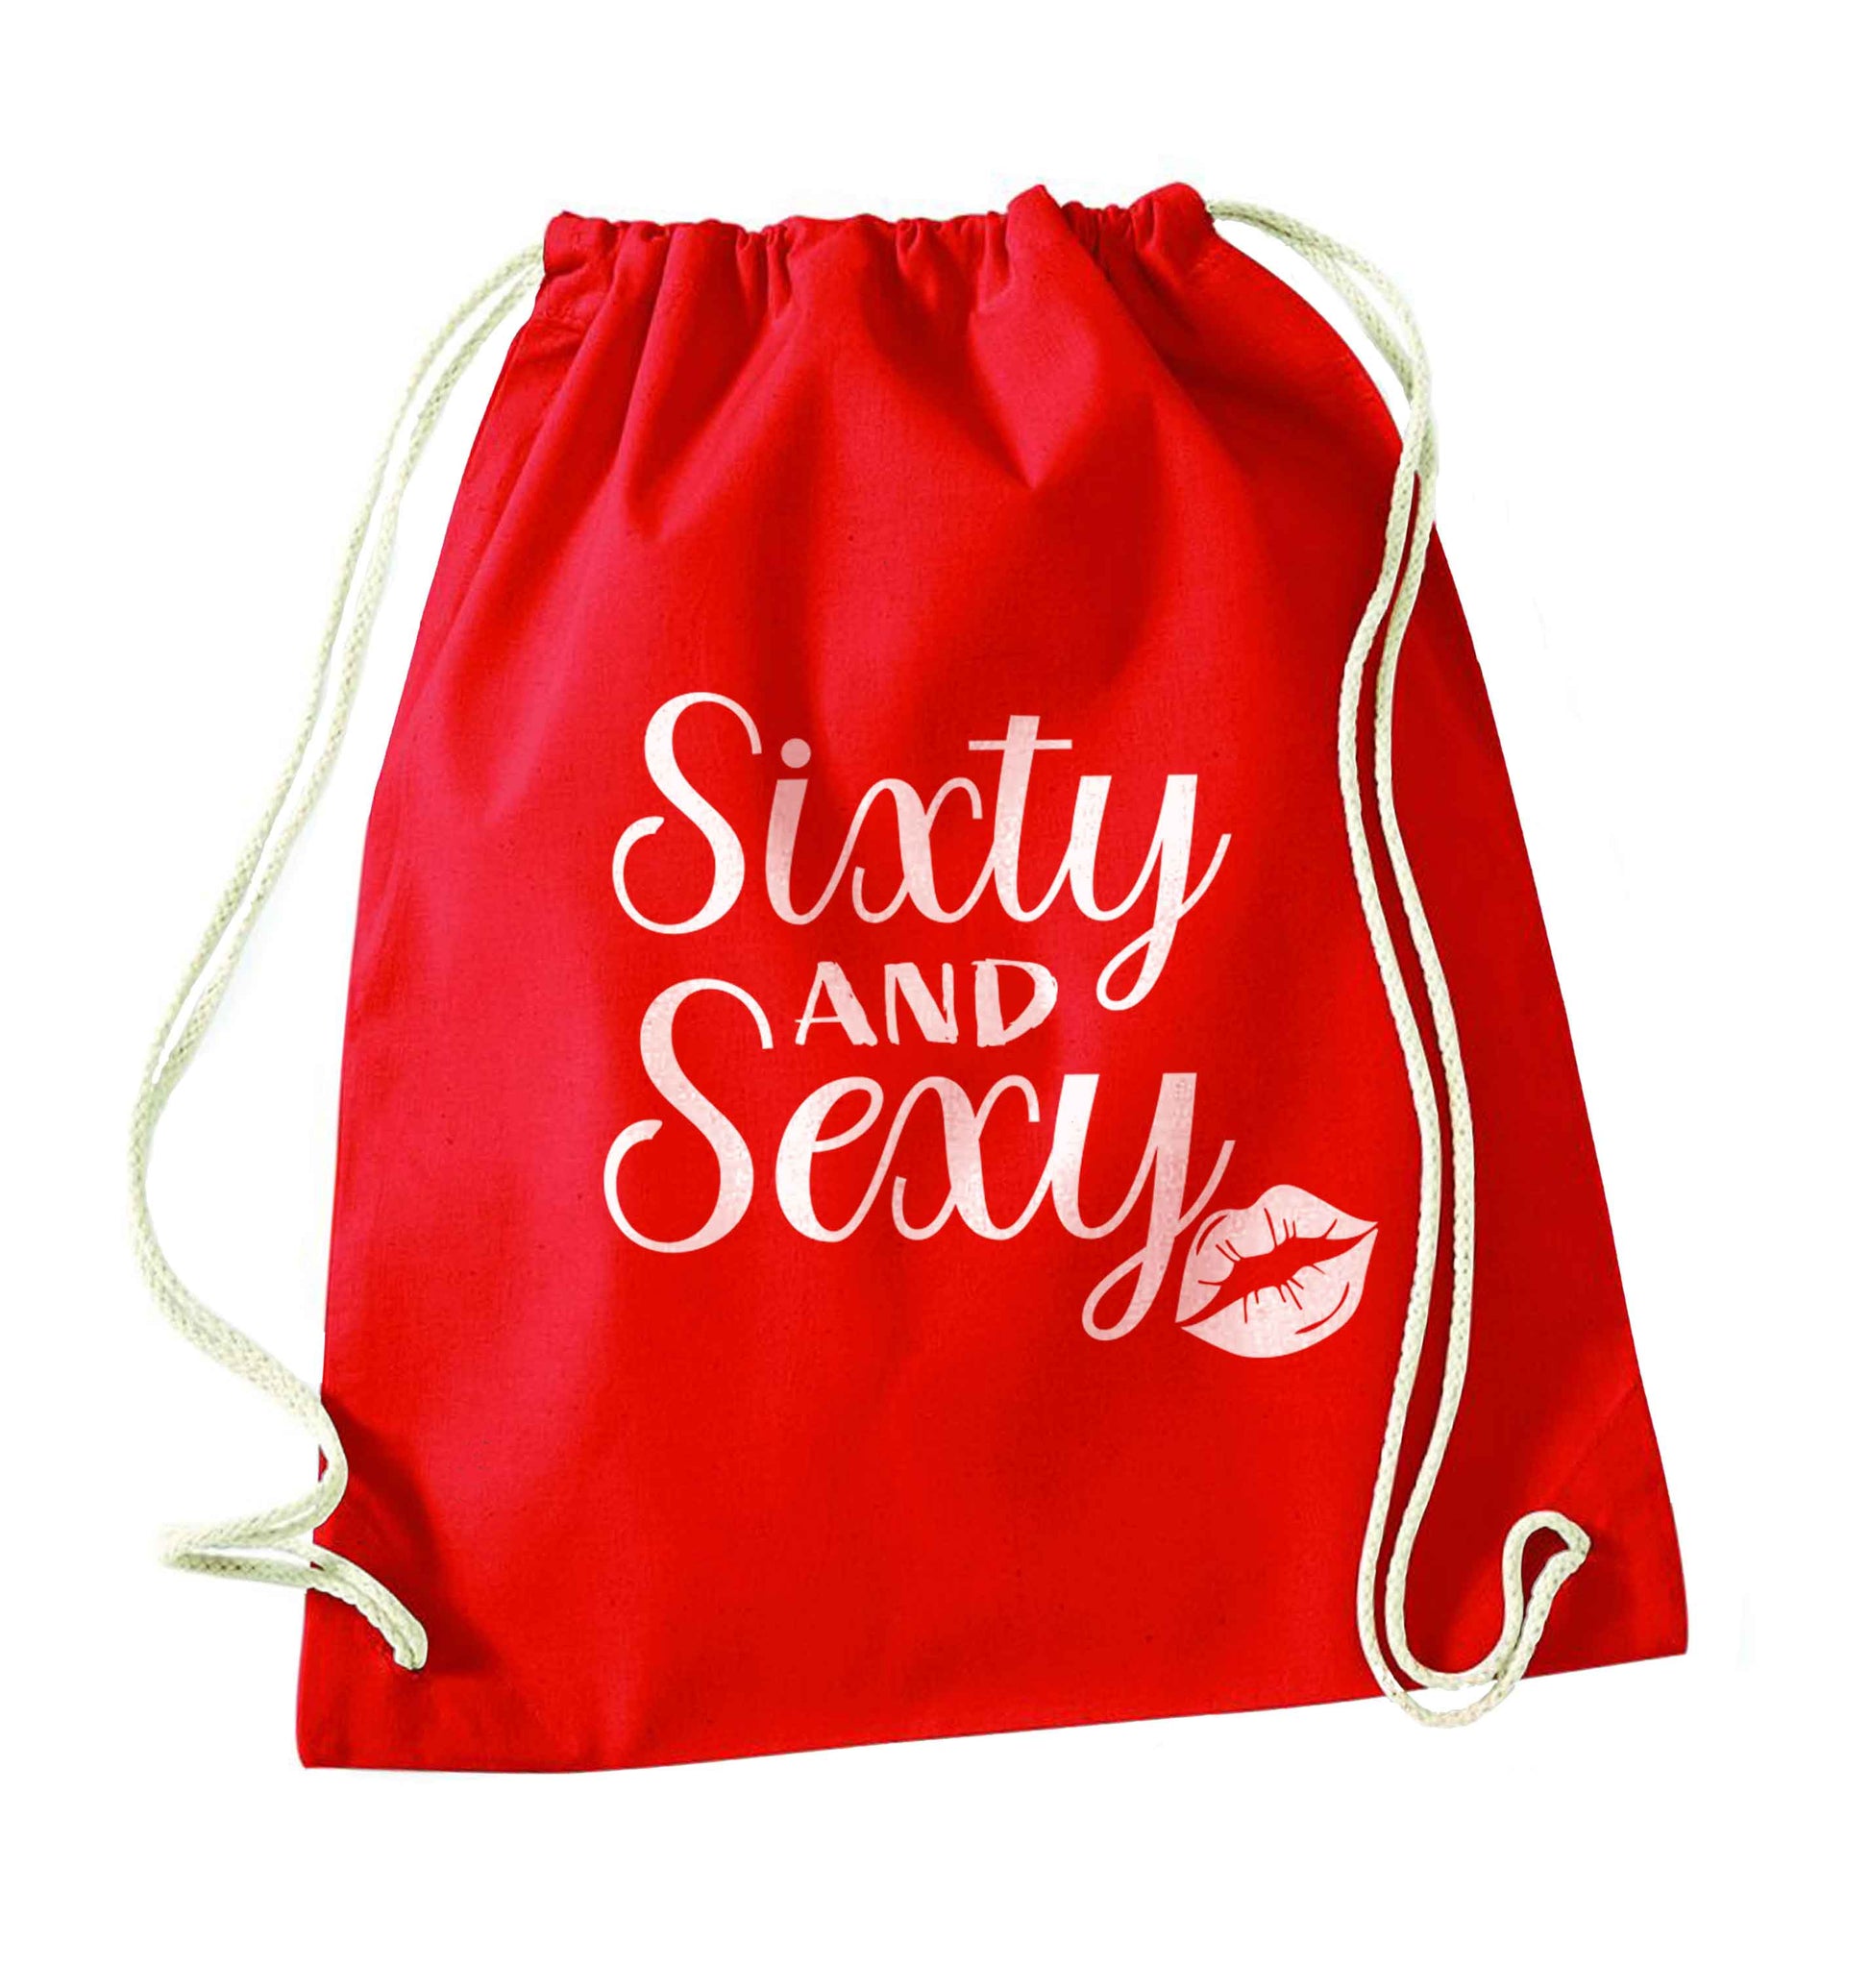 Sixty and sexy red drawstring bag 